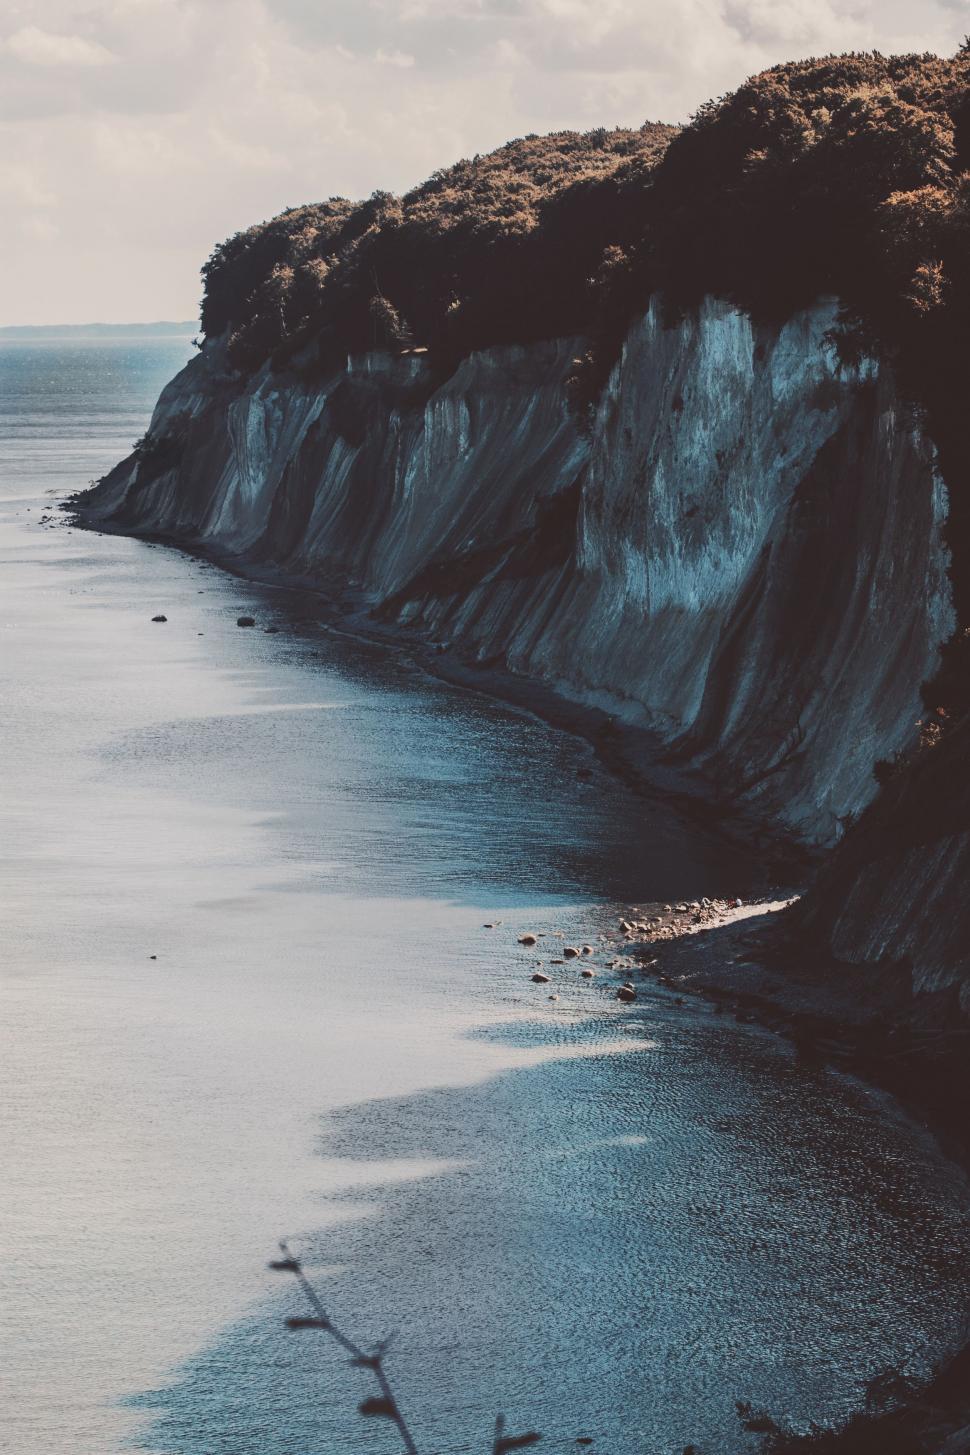 Free Image of Rocky Cliff Surrounding Body of Water 